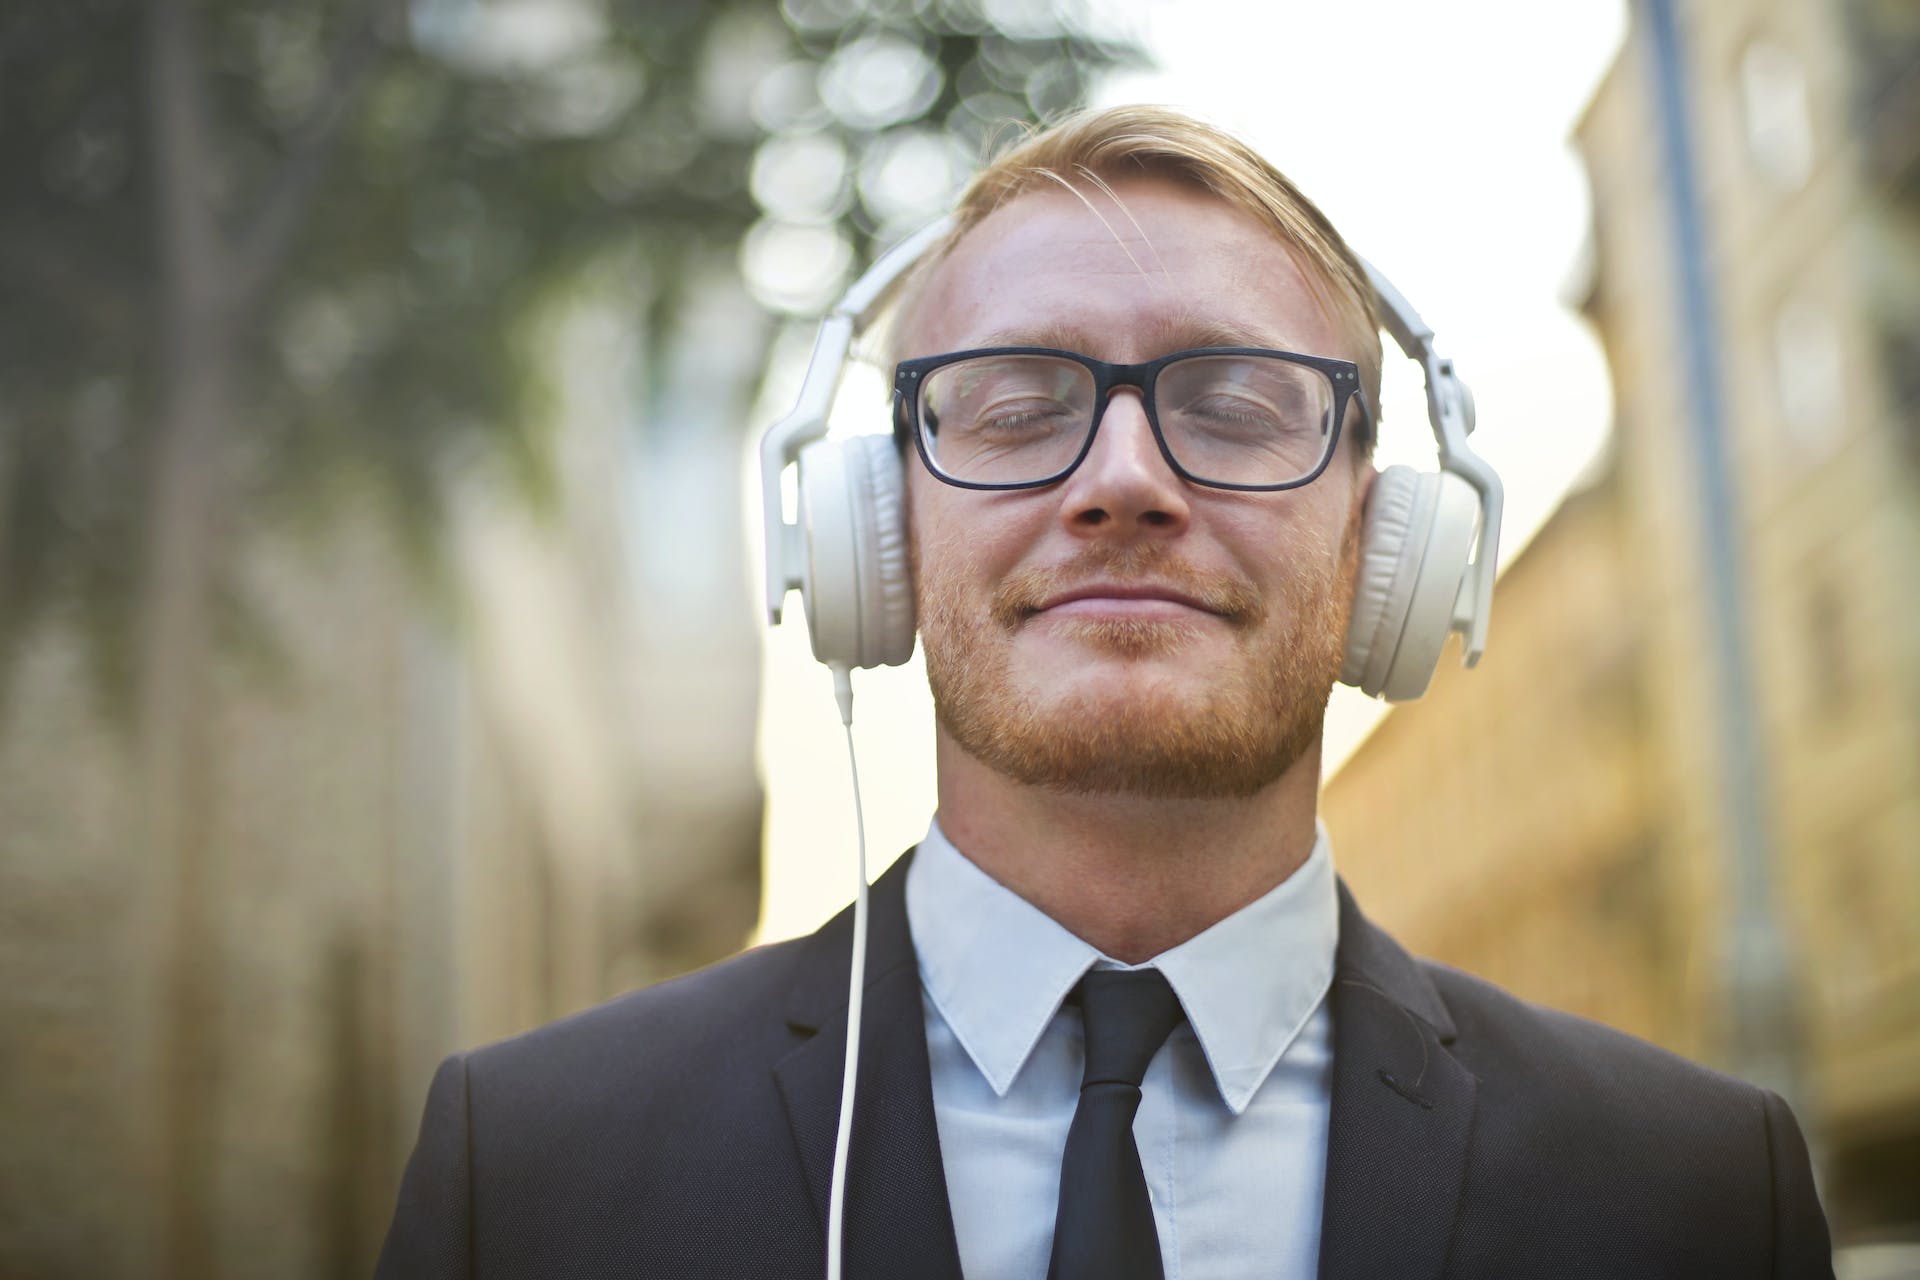 A man listening to music on his headphones | Source: Pexels